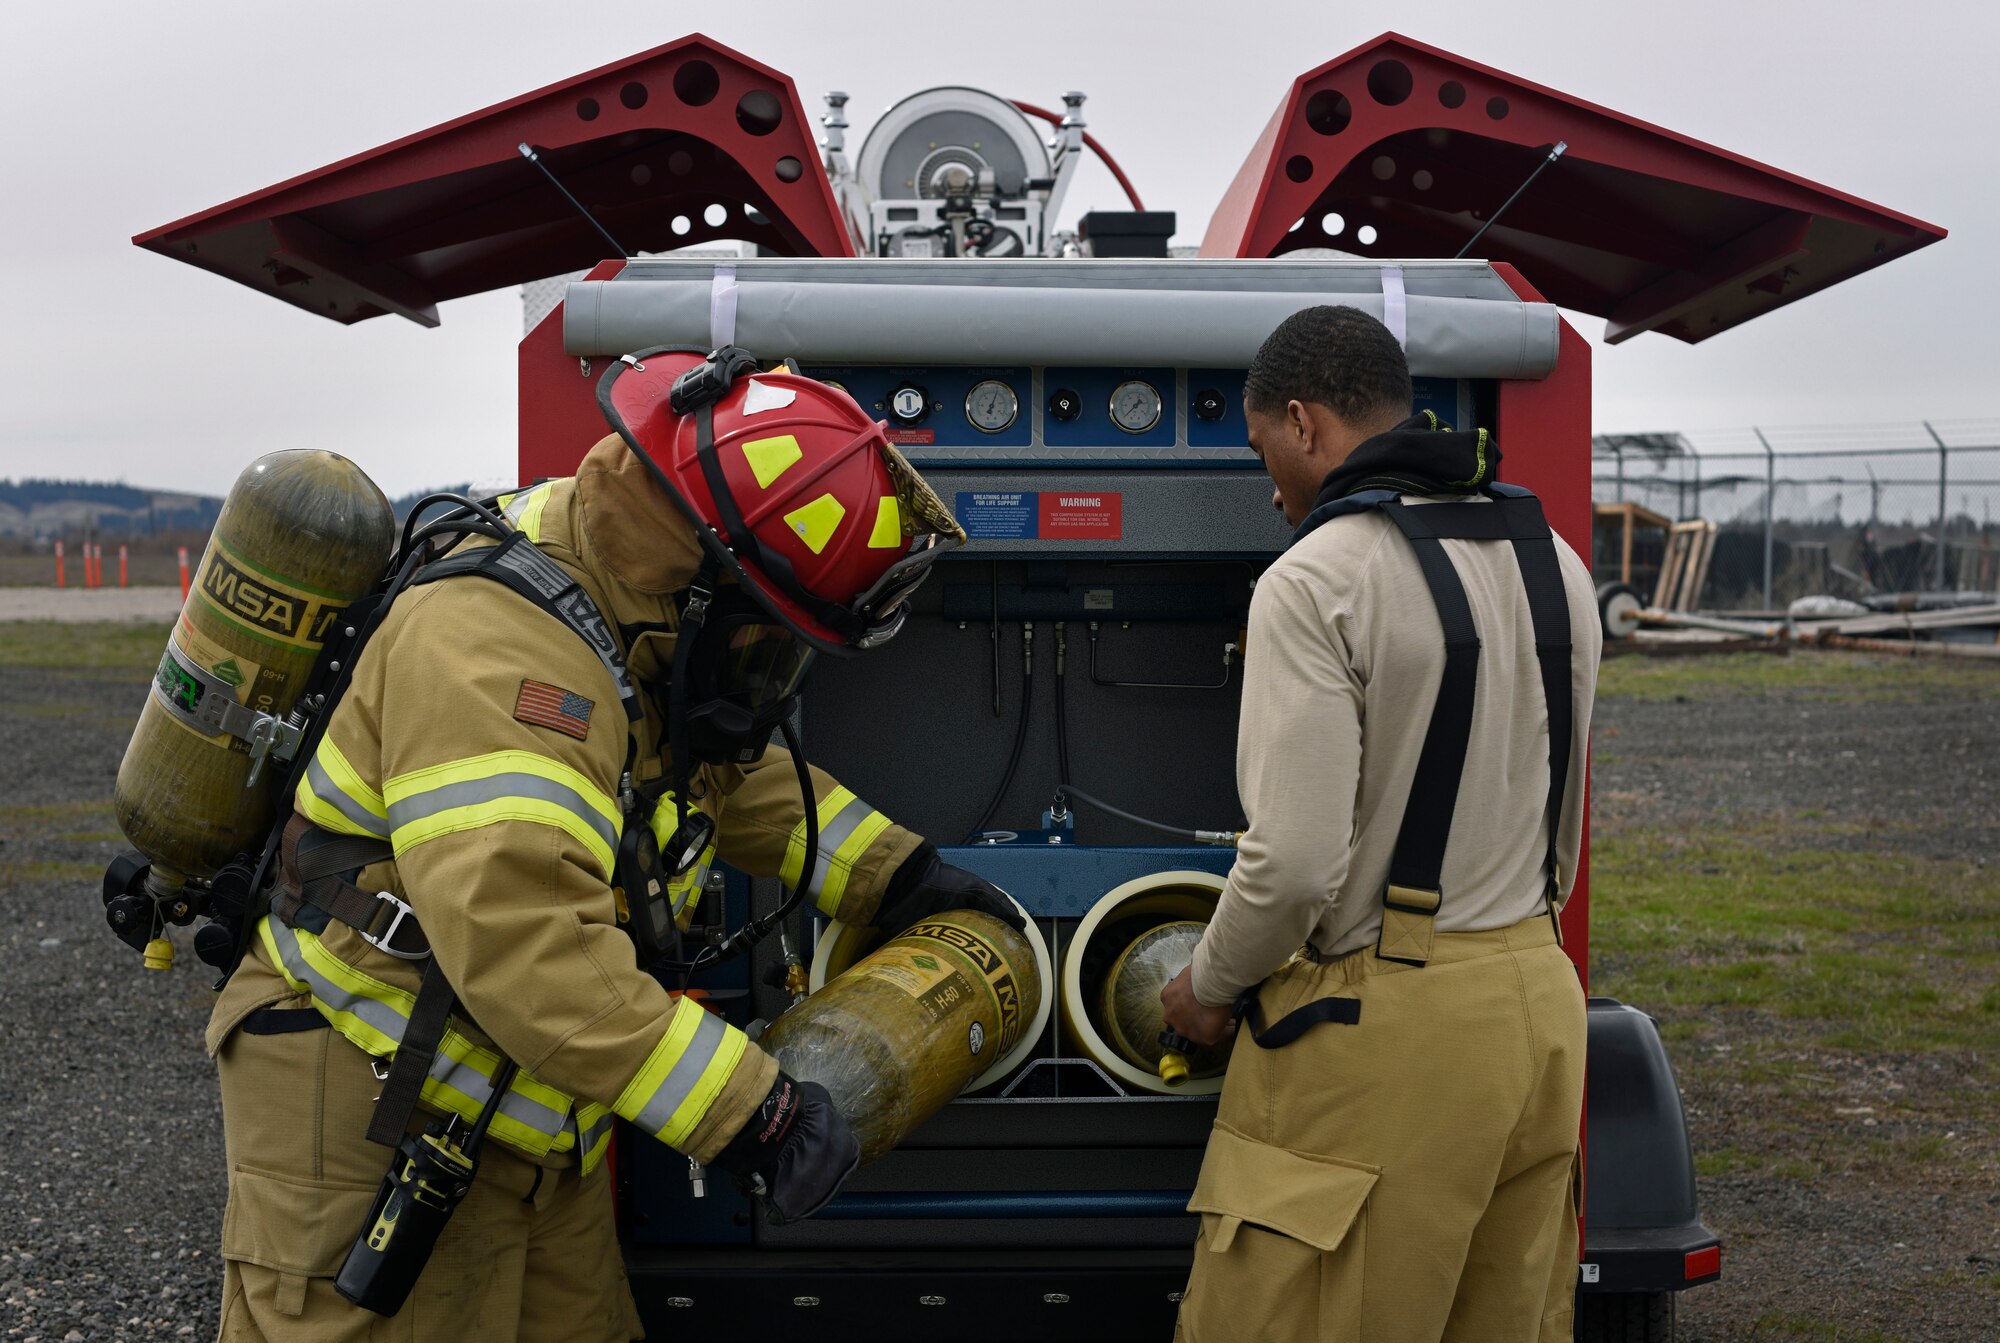 Senior Airman Jonathan Jones, 92nd Civil Engineer Squadron Fire Department firefighter, refills a self-contained breathing apparatus during a simulated aircraft live fire at Fairchild Air Force Base, Washington, April 18, 2018. The 92nd CES Fire Department coordinated and facilitated the classroom and hands-on portions of this joint service fire training and fire marshal training course. (U.S. Air Force photo/Airman 1st Class Jesenia Landaverde)